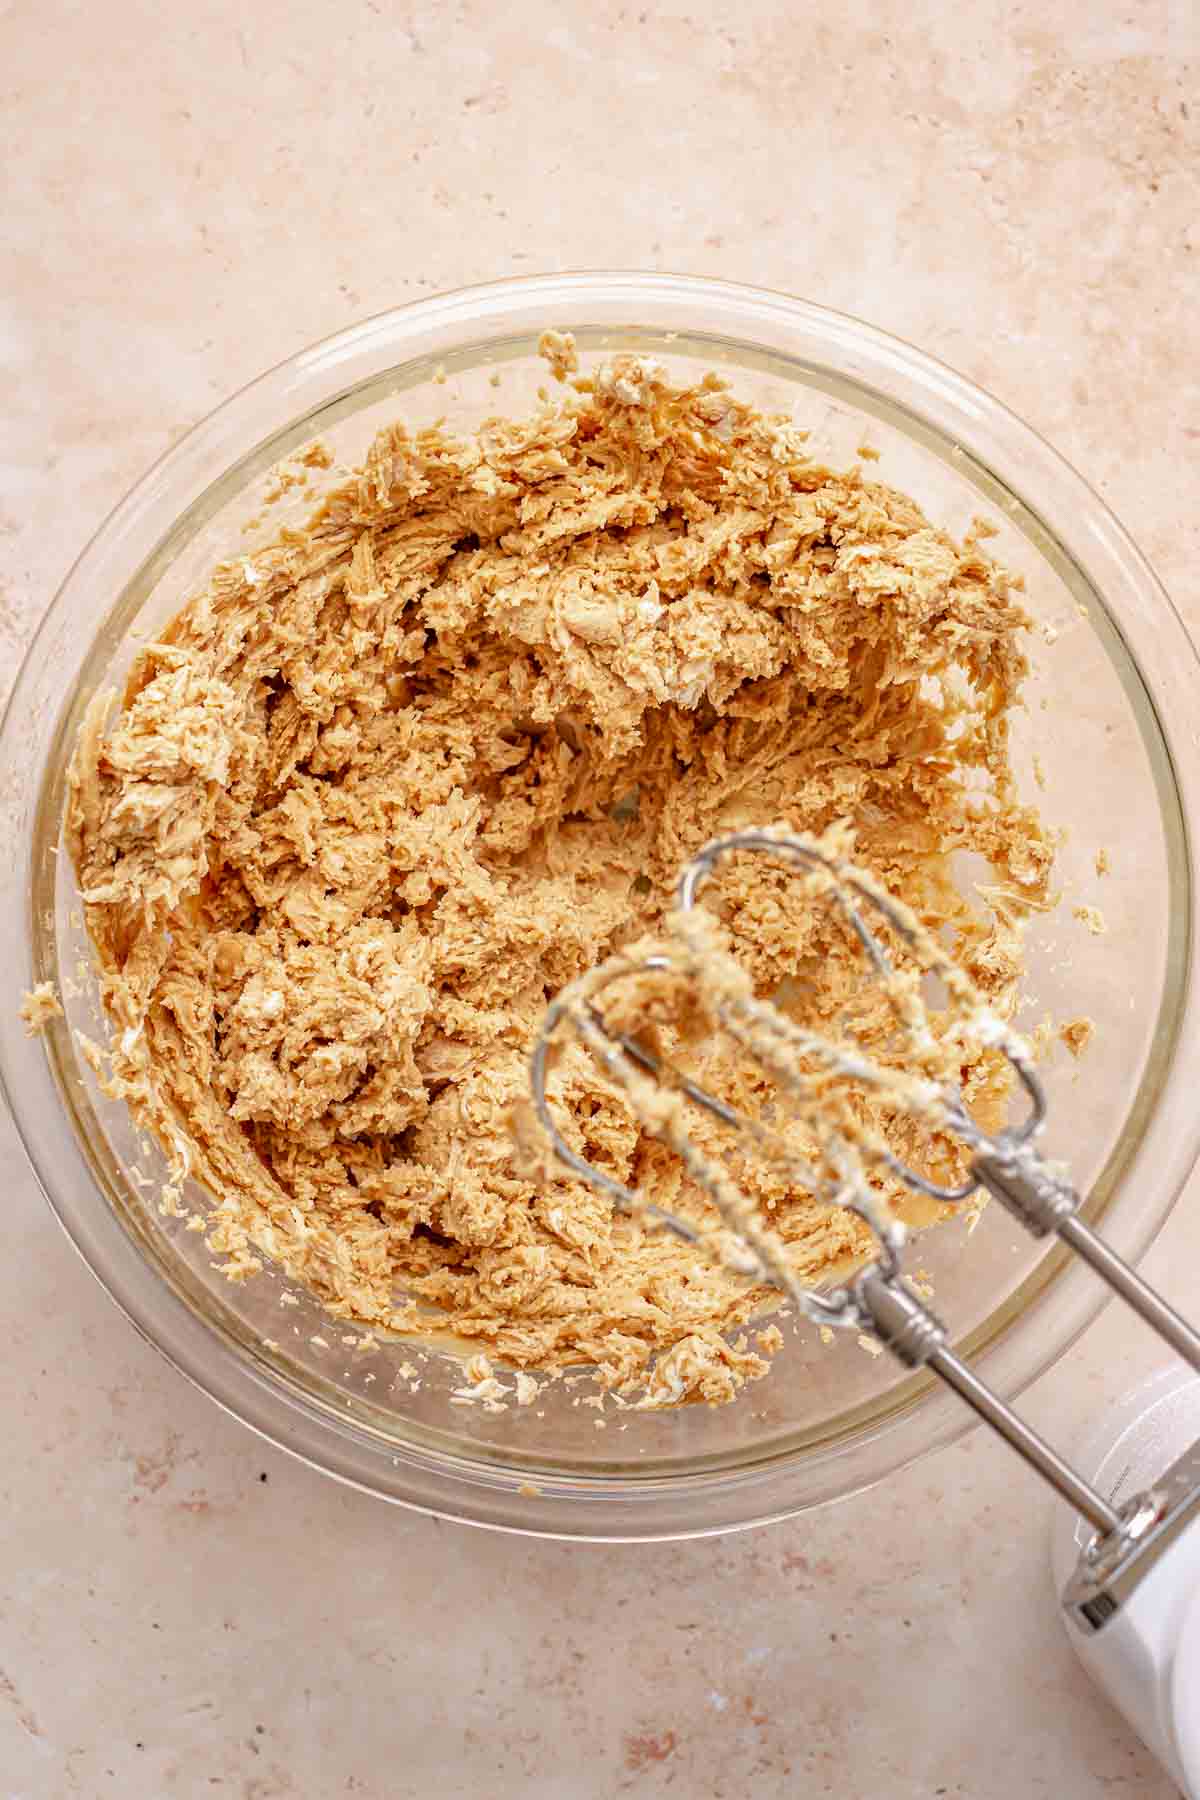 A hand mixer mixes together peanut butter and cream cheese in a bowl.